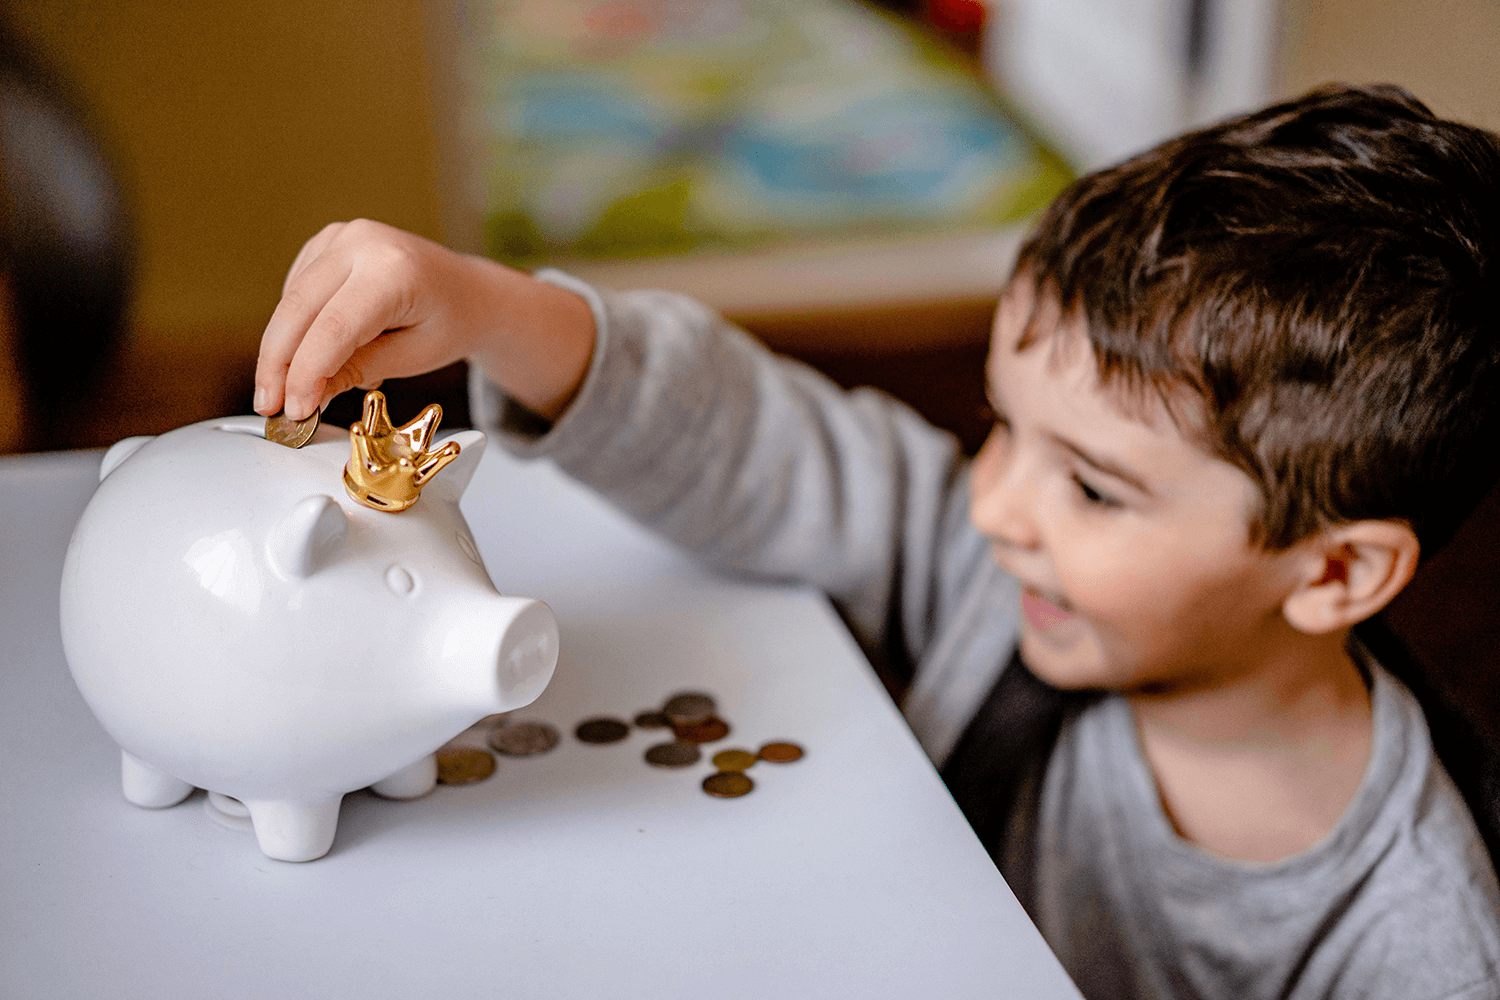 A young child putting money into a piggy bank.